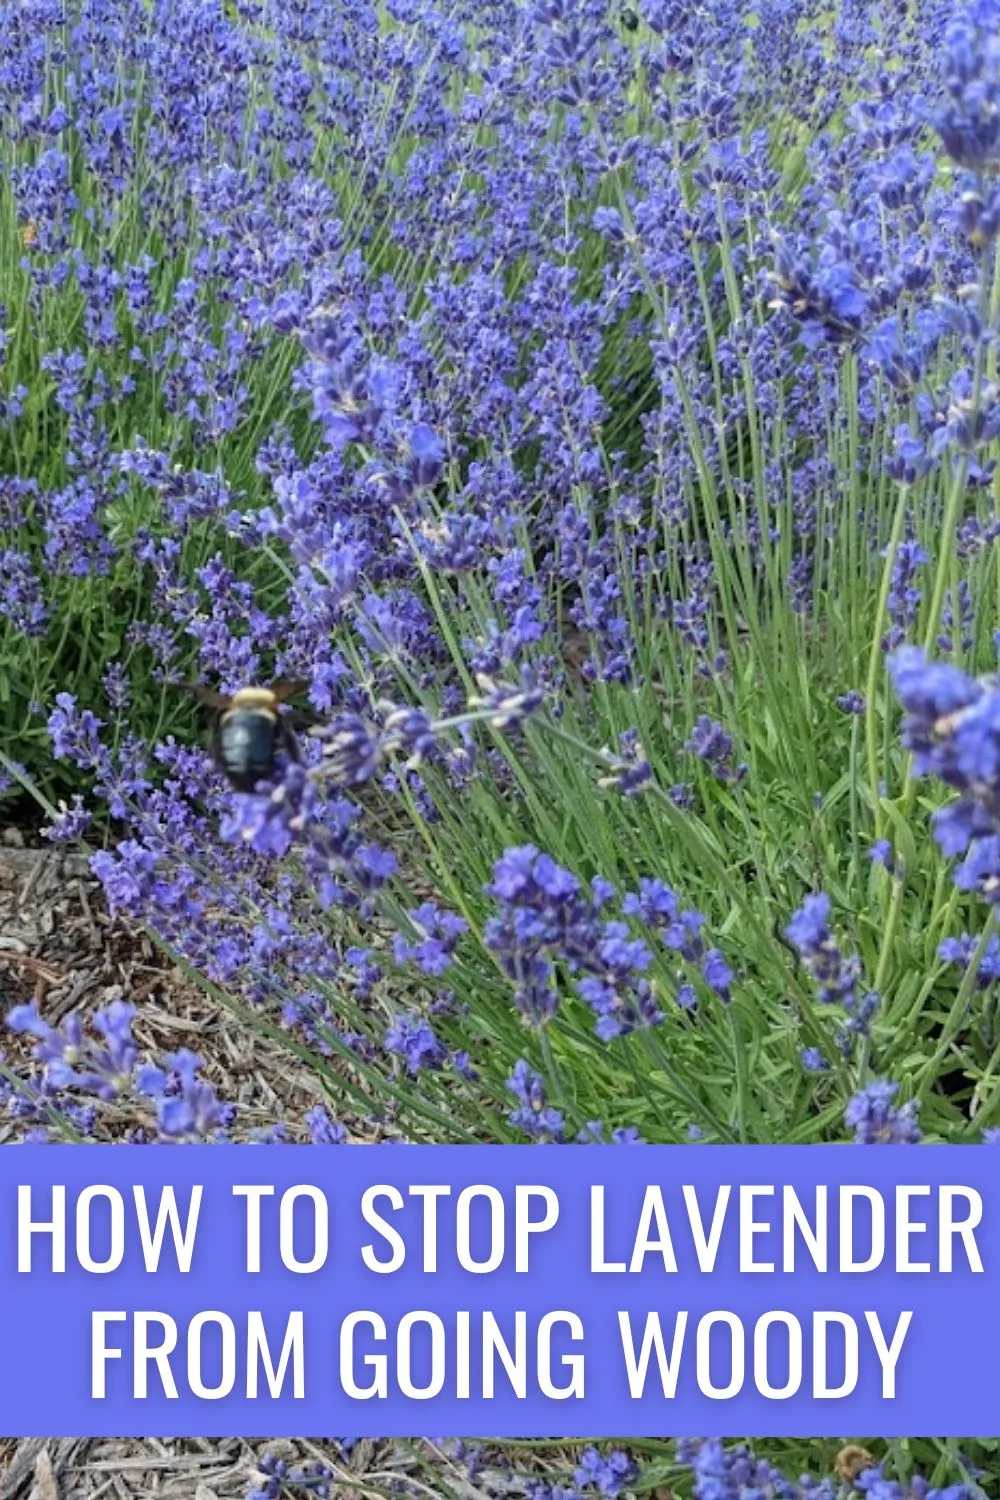 How to Stop Lavender from Going Woody.